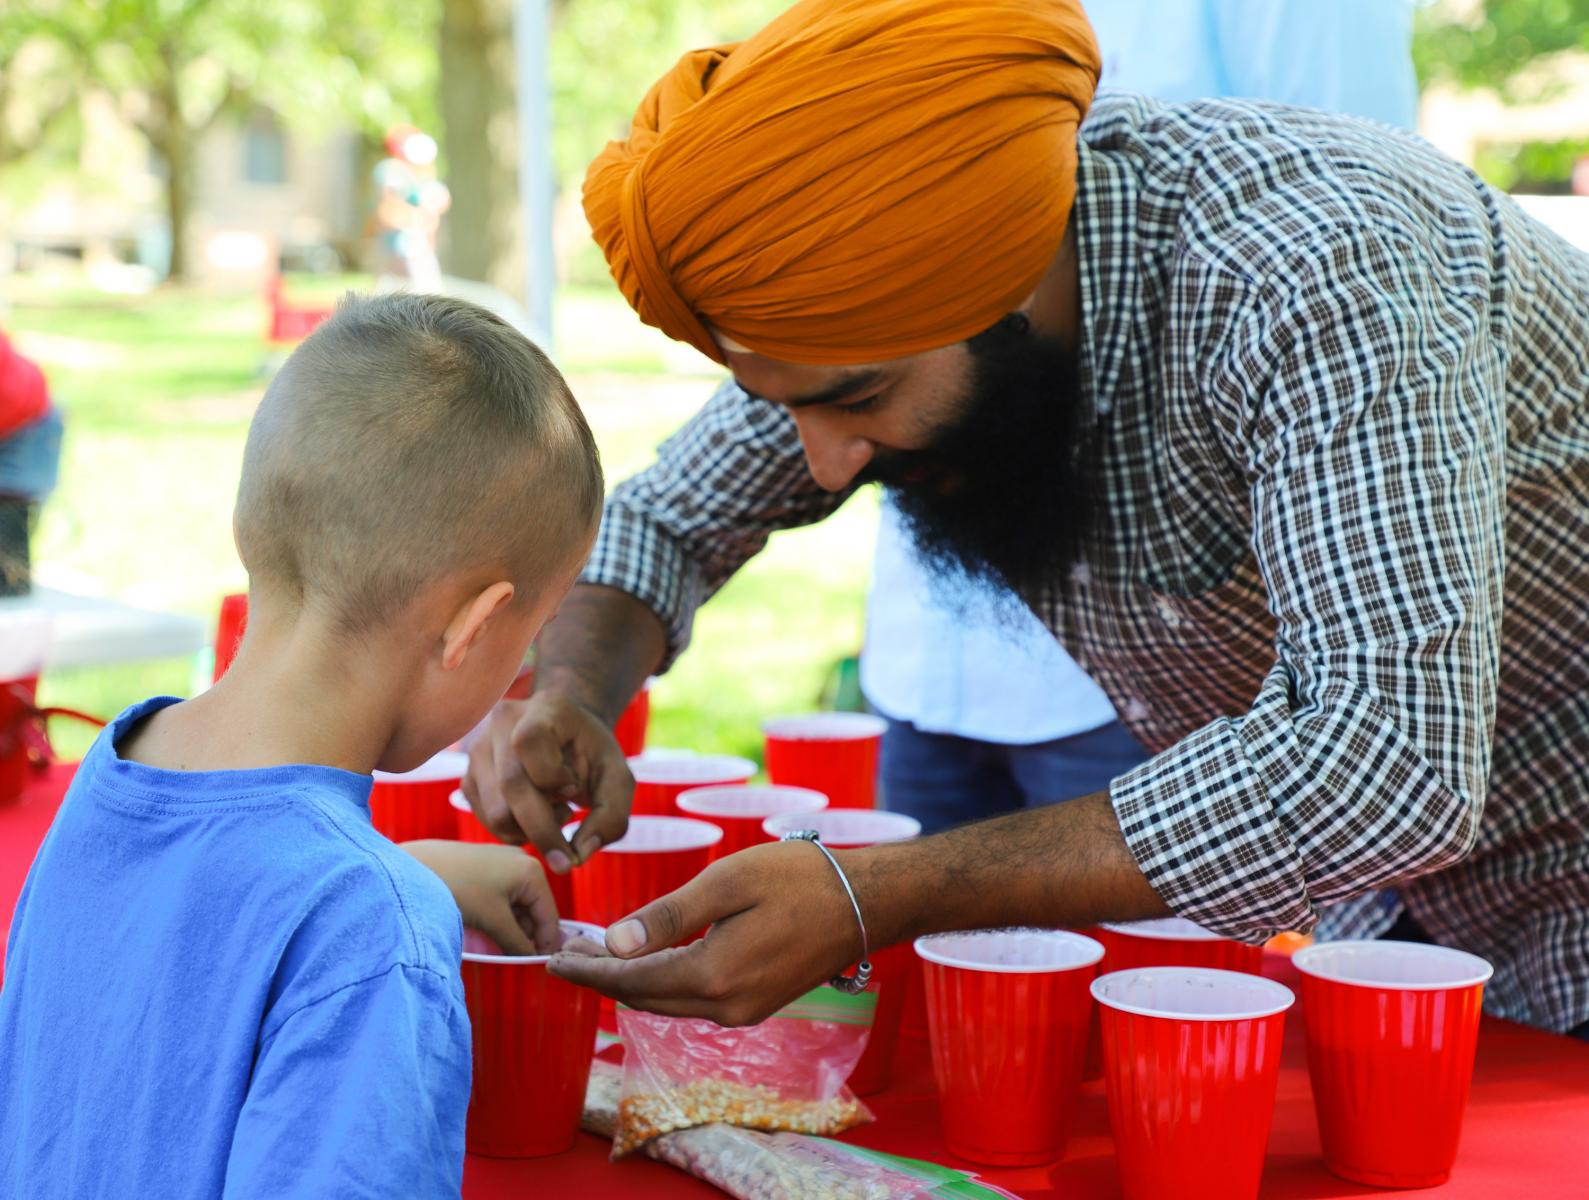 Mandeep Singh, doctoral student in the Department of Agronomy and Horticulture, helps a future scientist plant seeds in a cup of soil at the Plant a Seed booth during East Campus Discovery Days and Farmers Market 